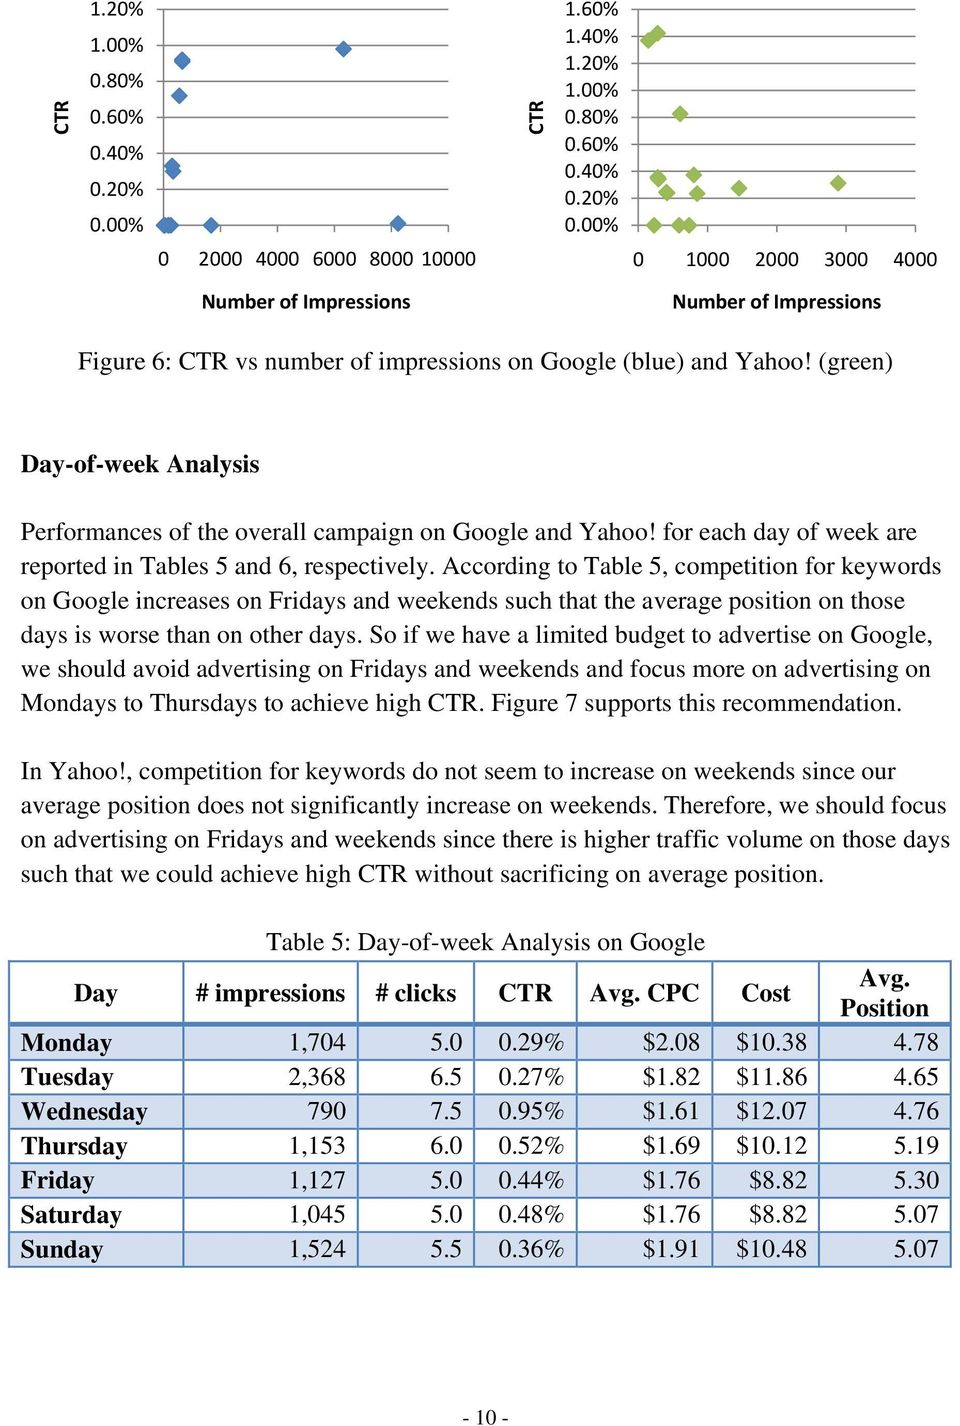 According to Table 5, competition for keywords on Google increases on Fridays and weekends such that the average position on those days is worse than on other days.